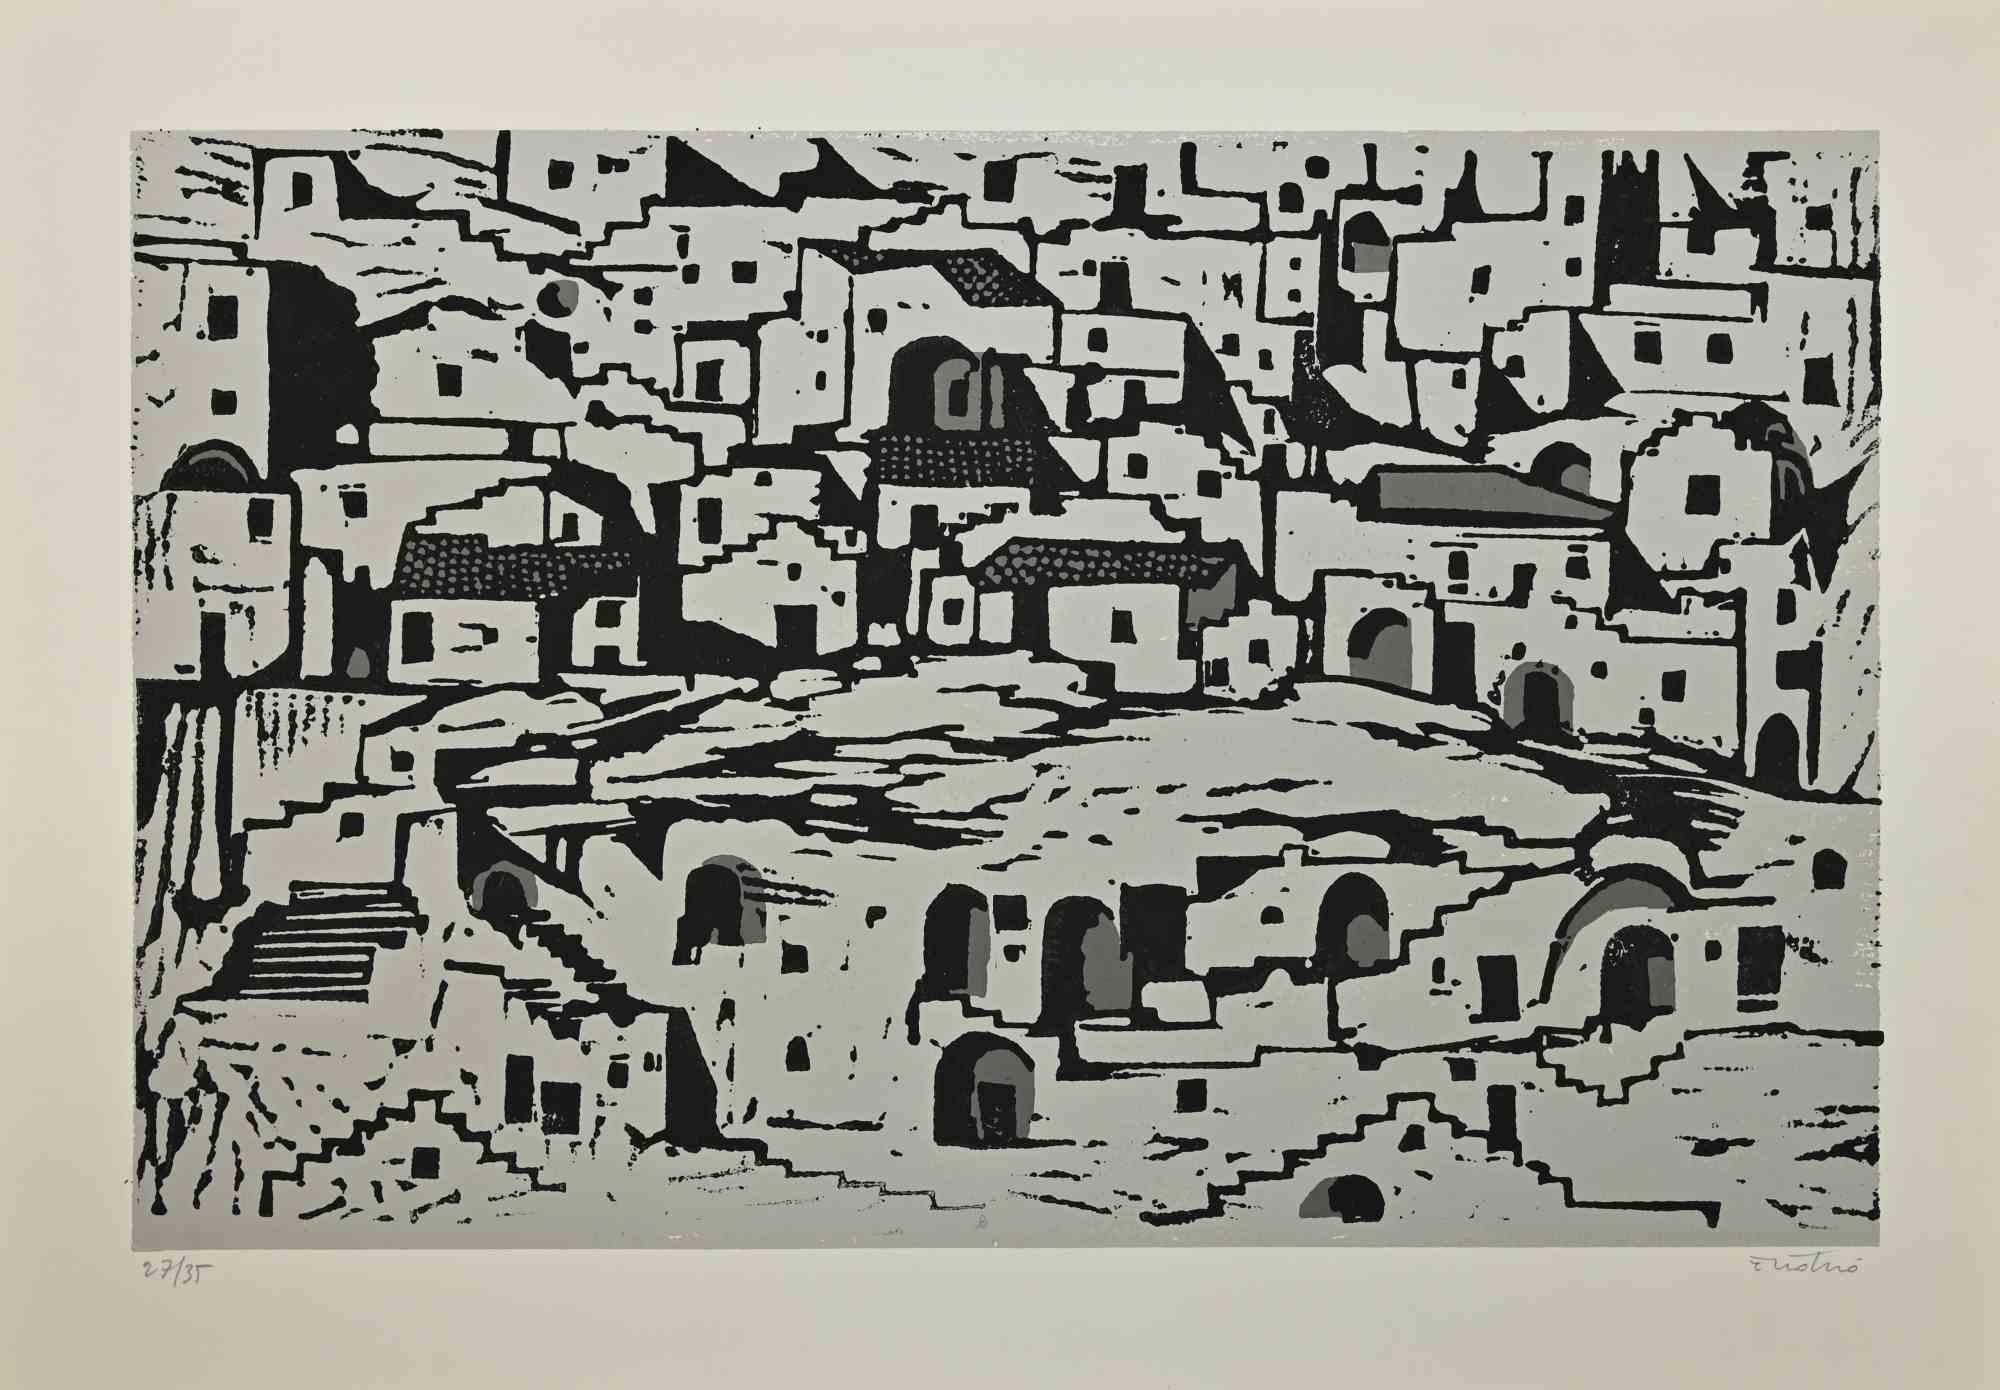 Landscape is an Etching realized by Enotrio Pugliese in 1960s.

Hand-signed by the artist on the lower.

Numbered, Limited edition of 35 prints.

Good conditions.

Enotrio Pugliese (May 11, 1920 - August 1989) was an Italian painter. Born in Buenos